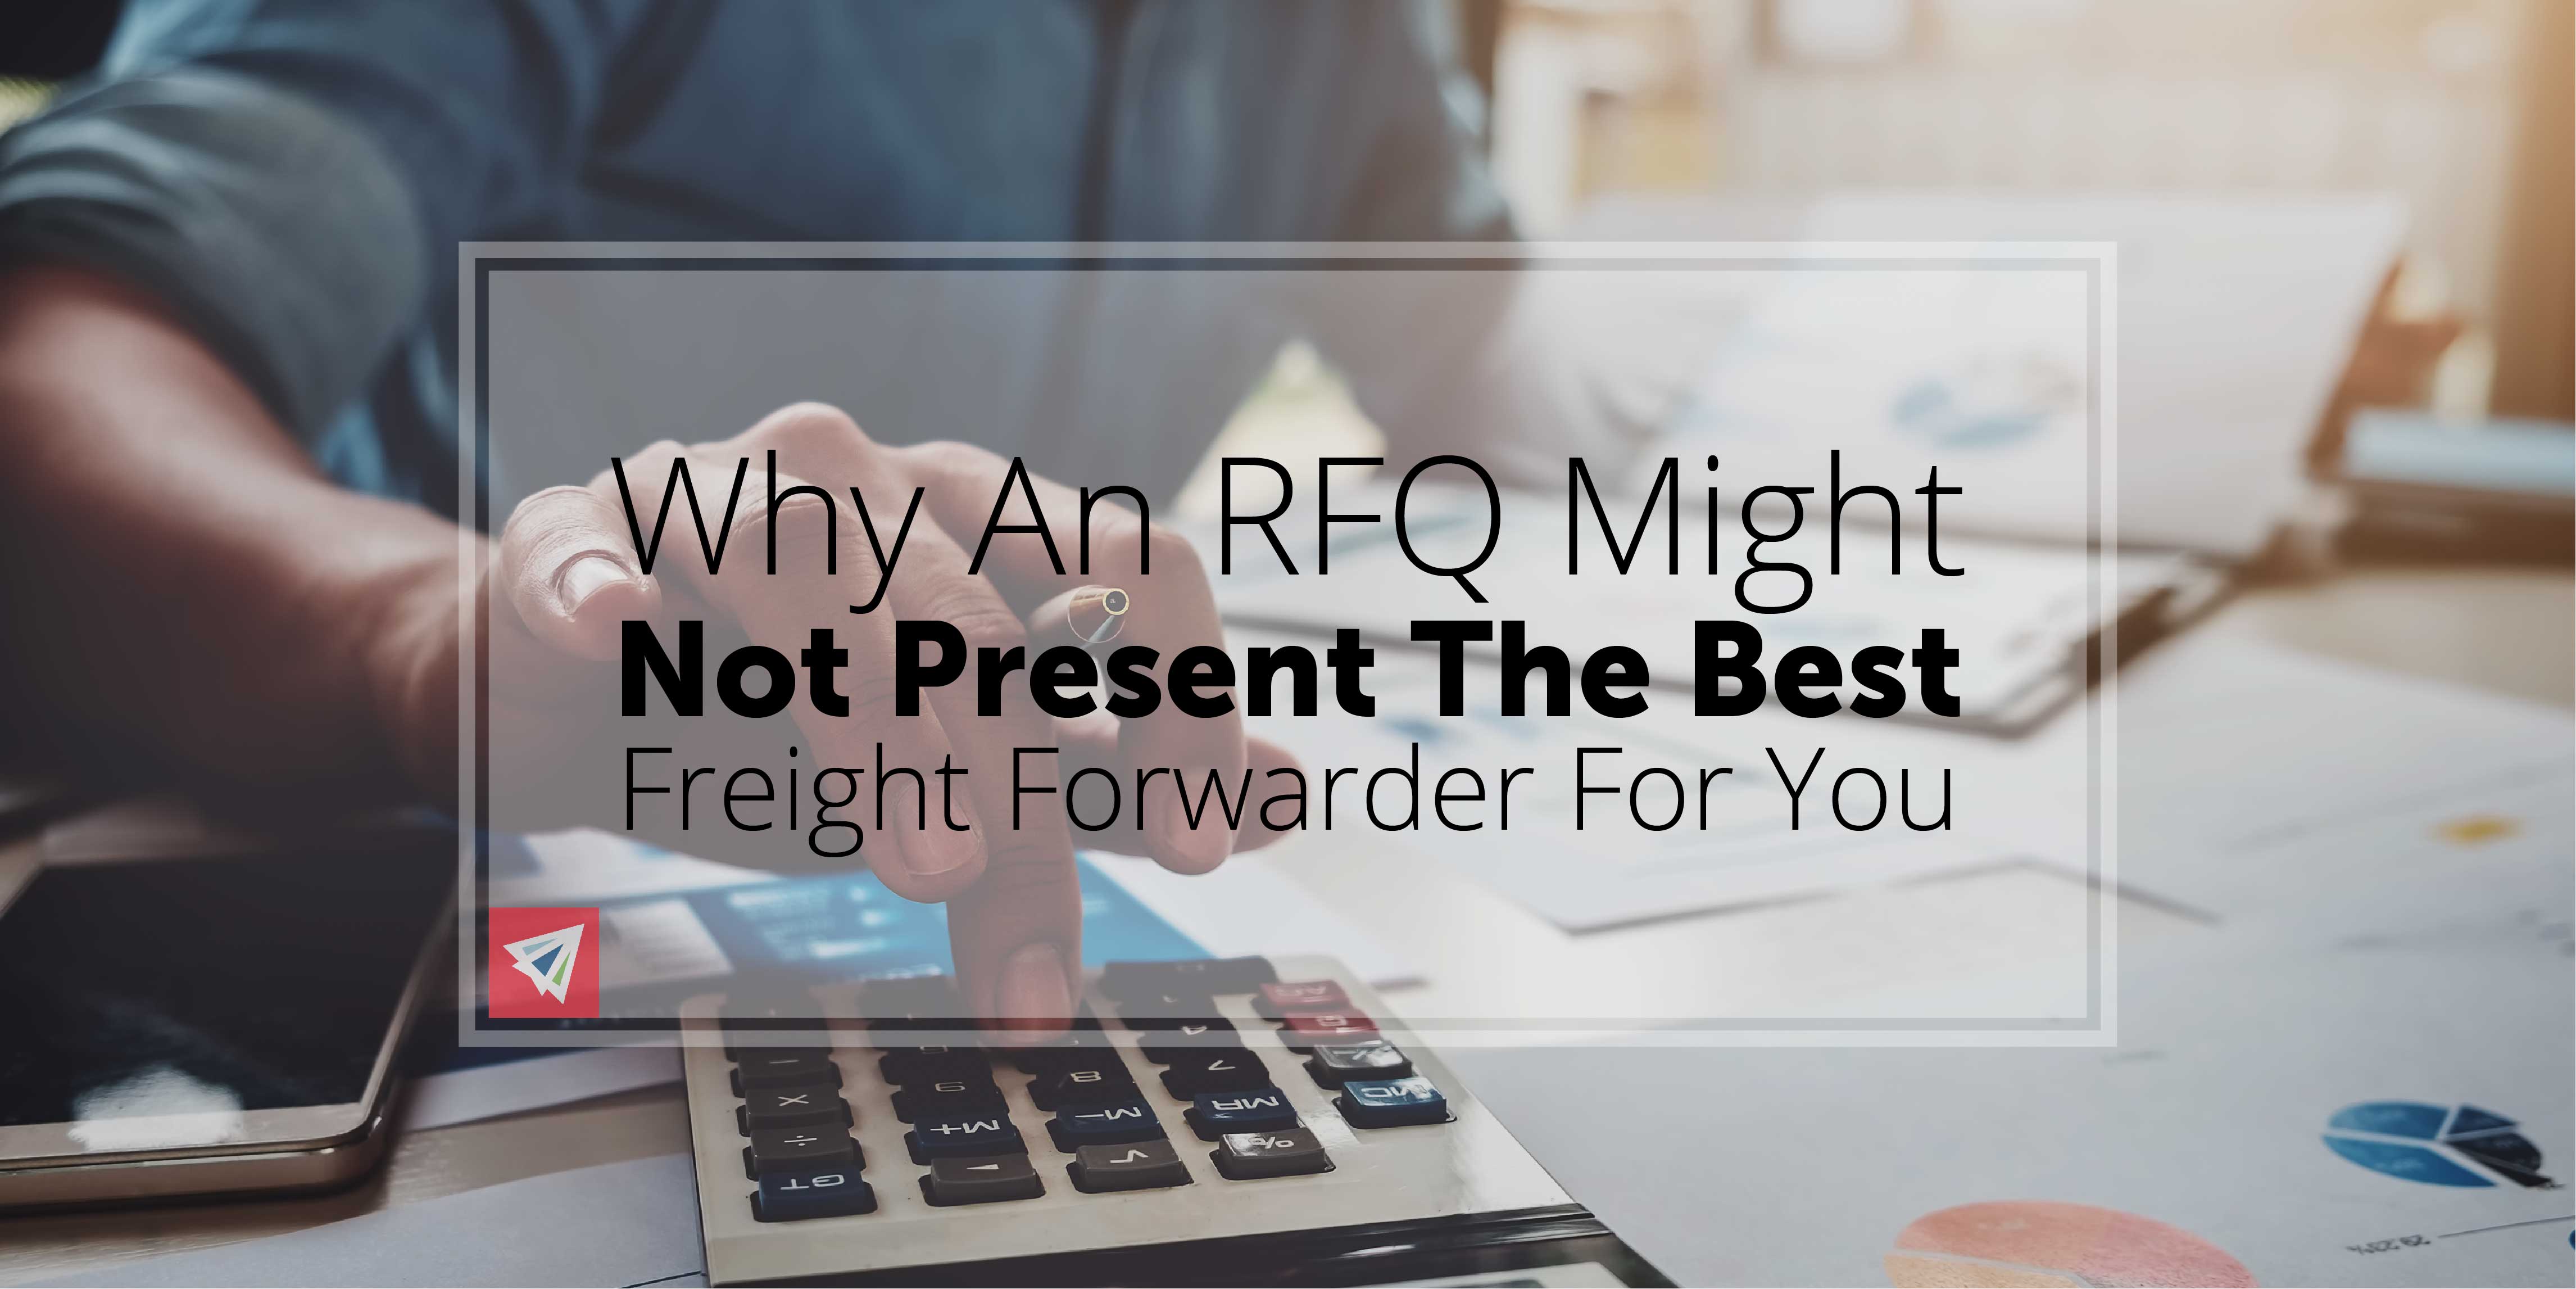 Why An RFQ Might Not Present The Best Freight Forwarder For You